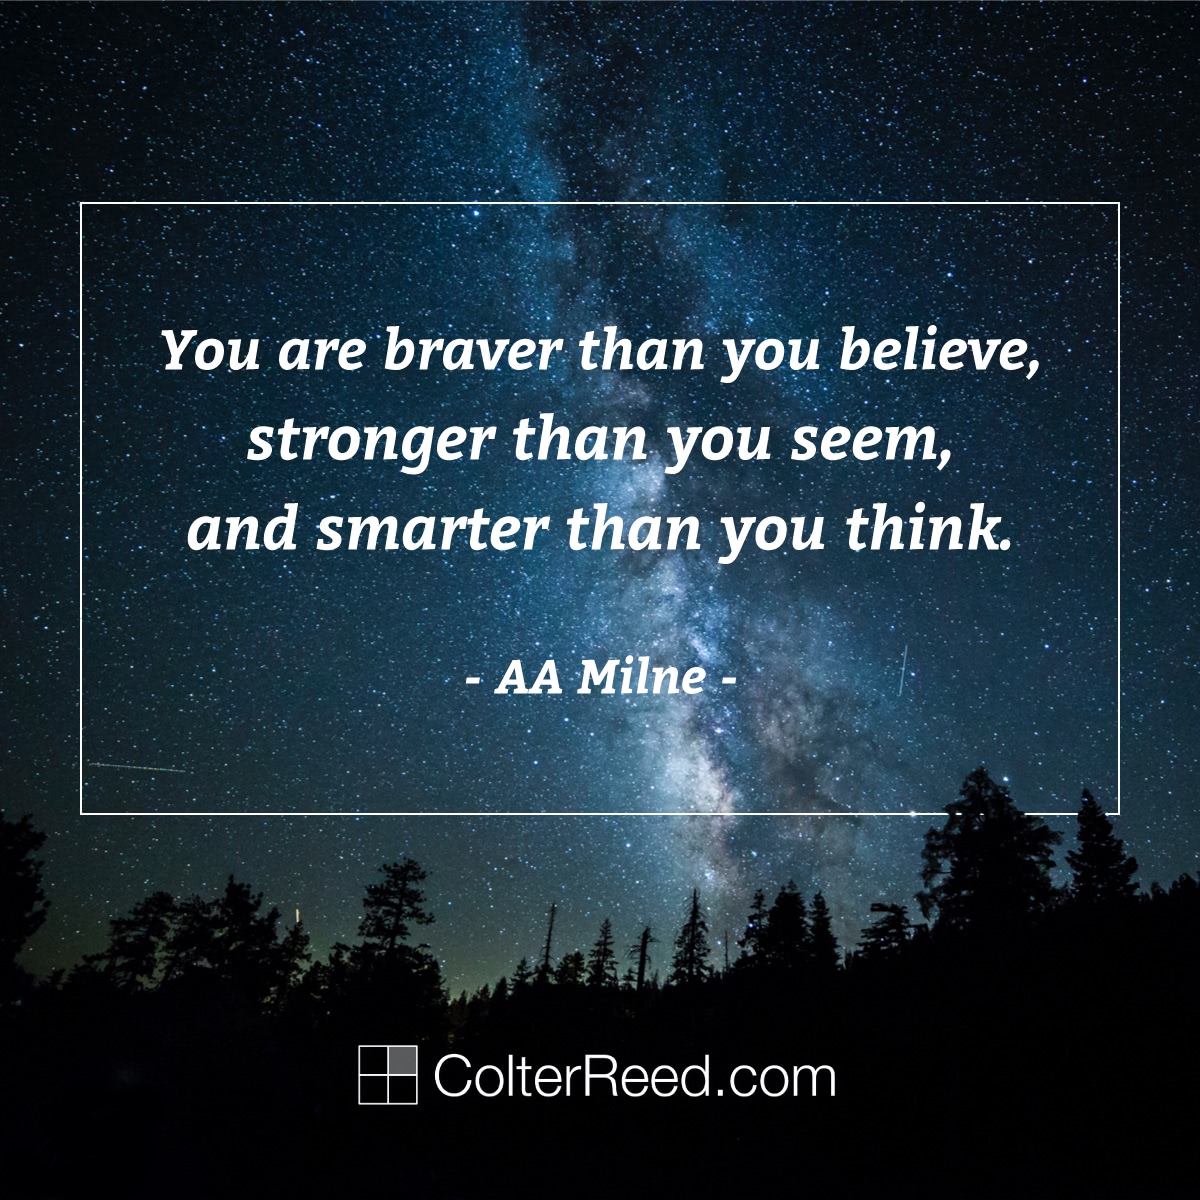 “You are braver than you believe, stronger than you seem, and smarter than you think.” —AA Milne